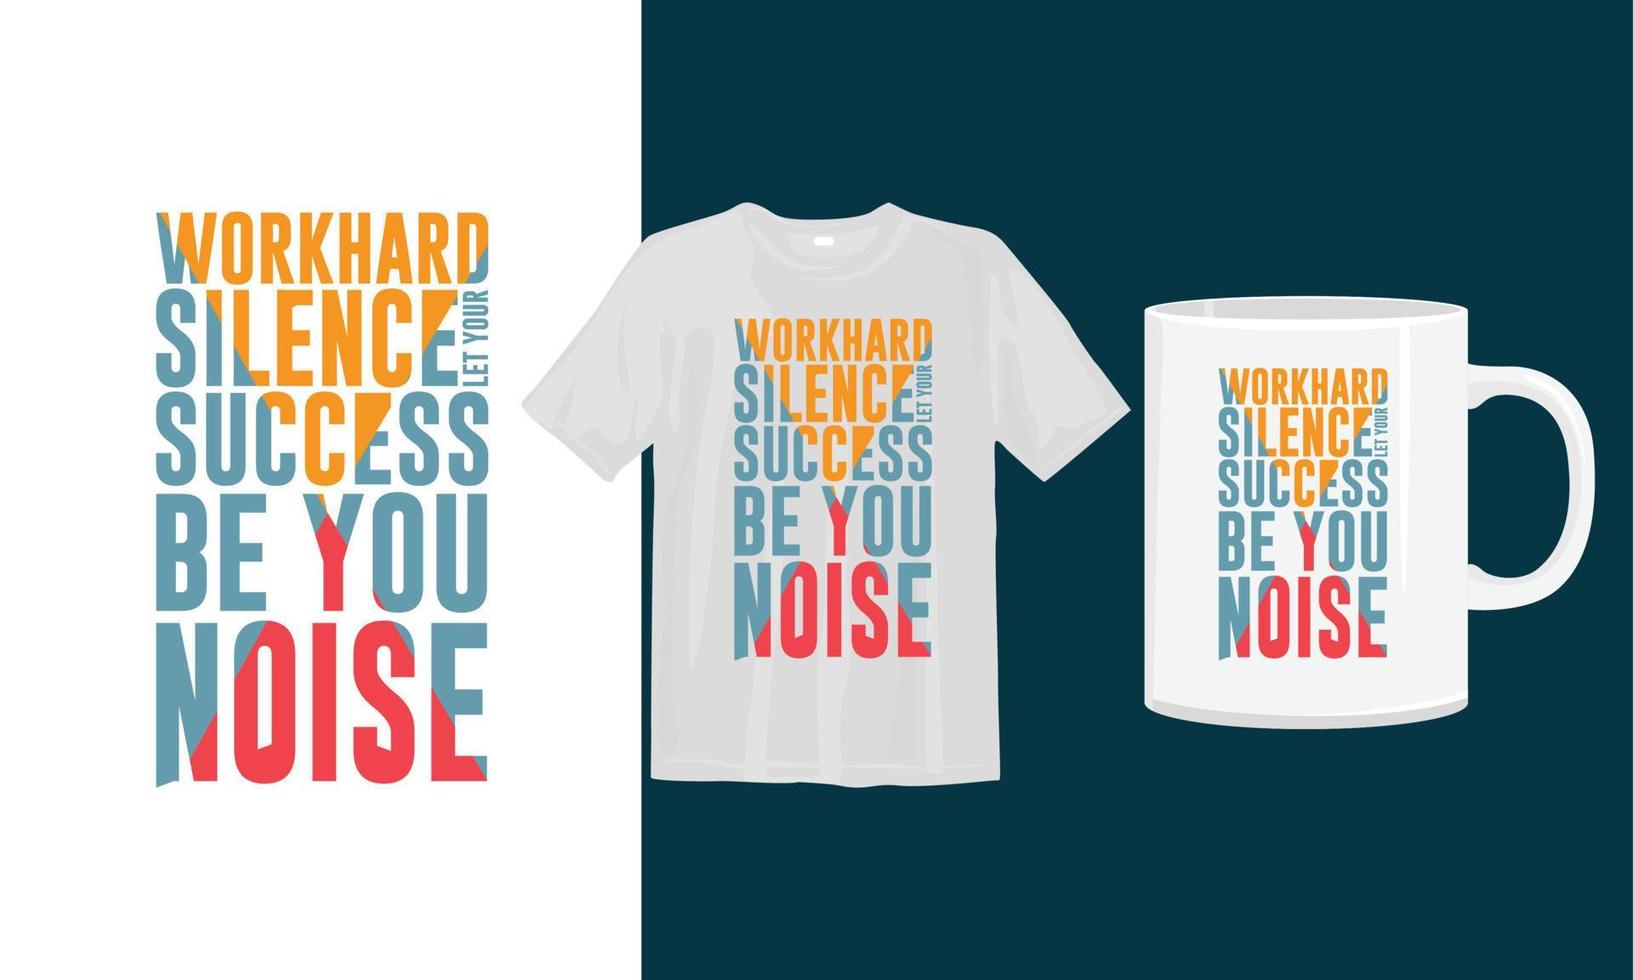 WorkHard silence let your success be you Noise T shirt Design, Typography T shirt design. vector